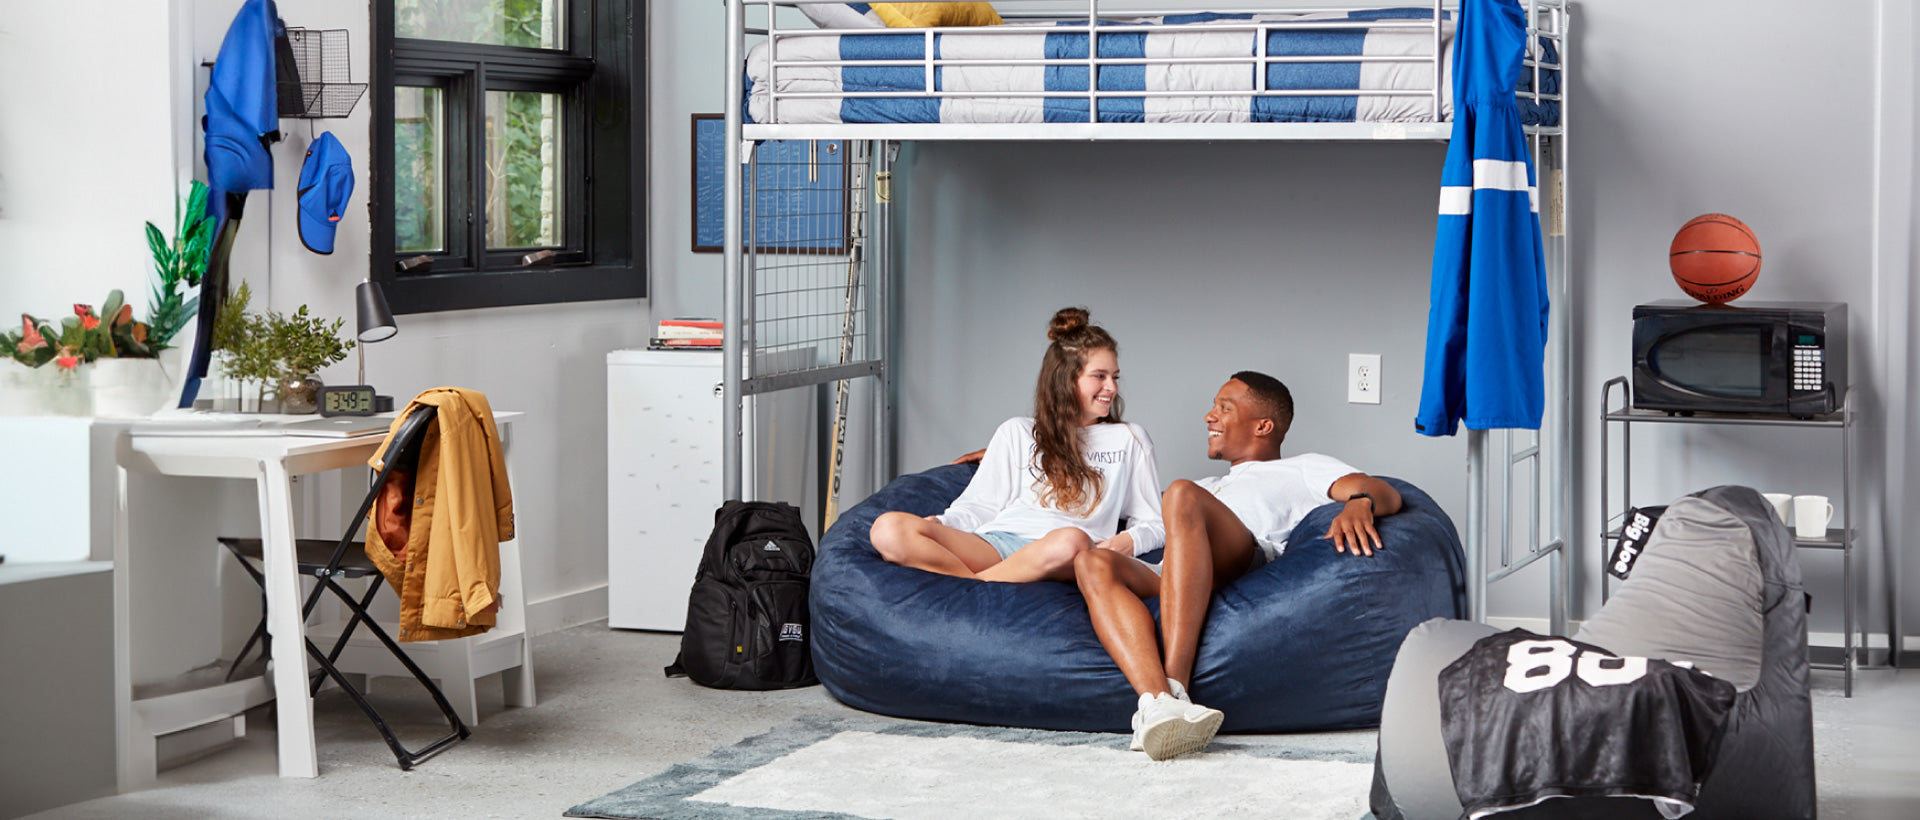 Back to School Dorm Room Chairs and Loungers